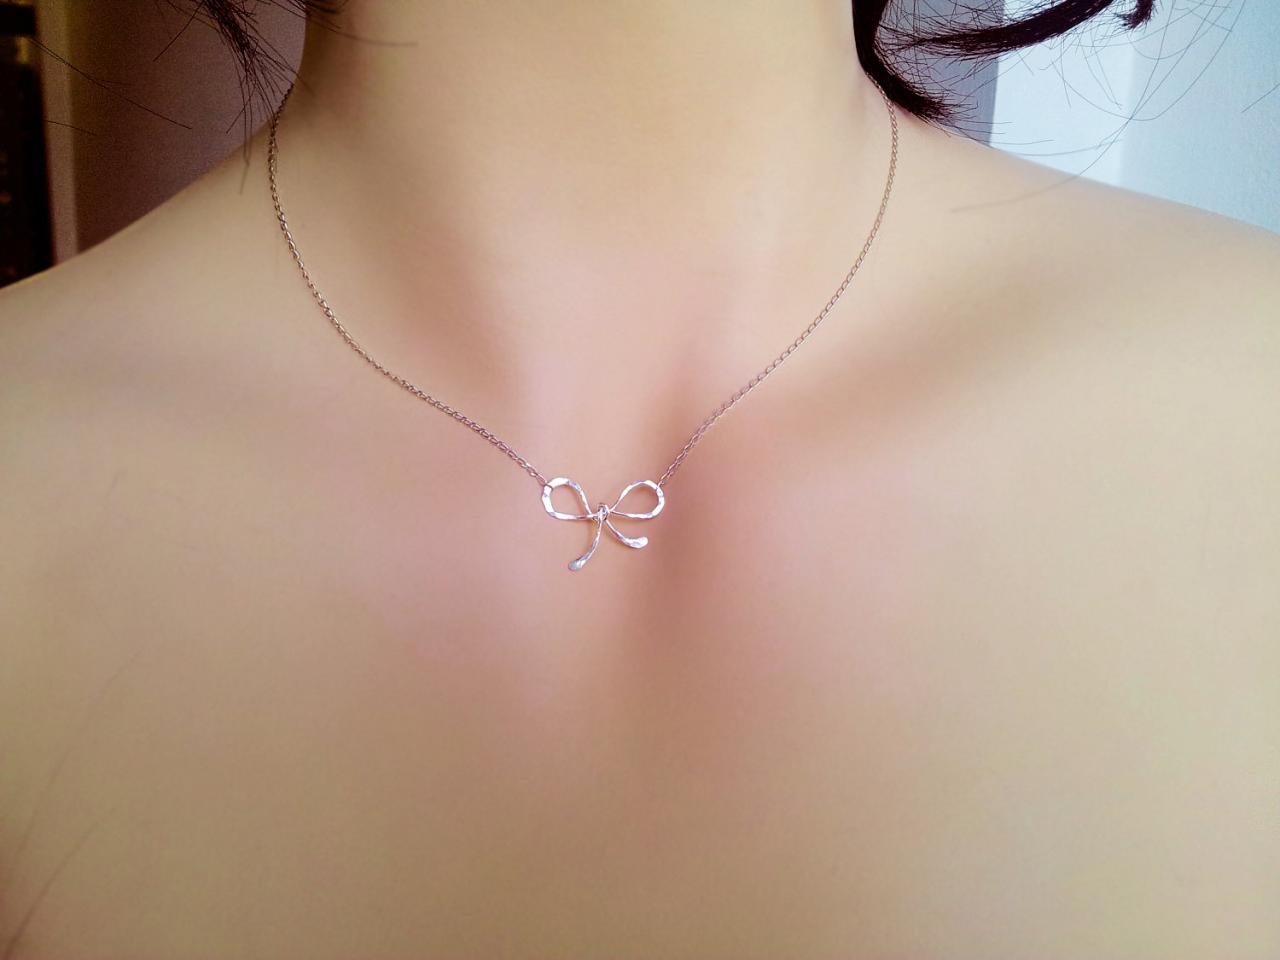 Love Knot Choker, Bow Necklace, Dainty Necklace, Birthday Gift, Bridesmaid Gifts, Sister, Mom Gift, Girl, Wife, Friend, Bow